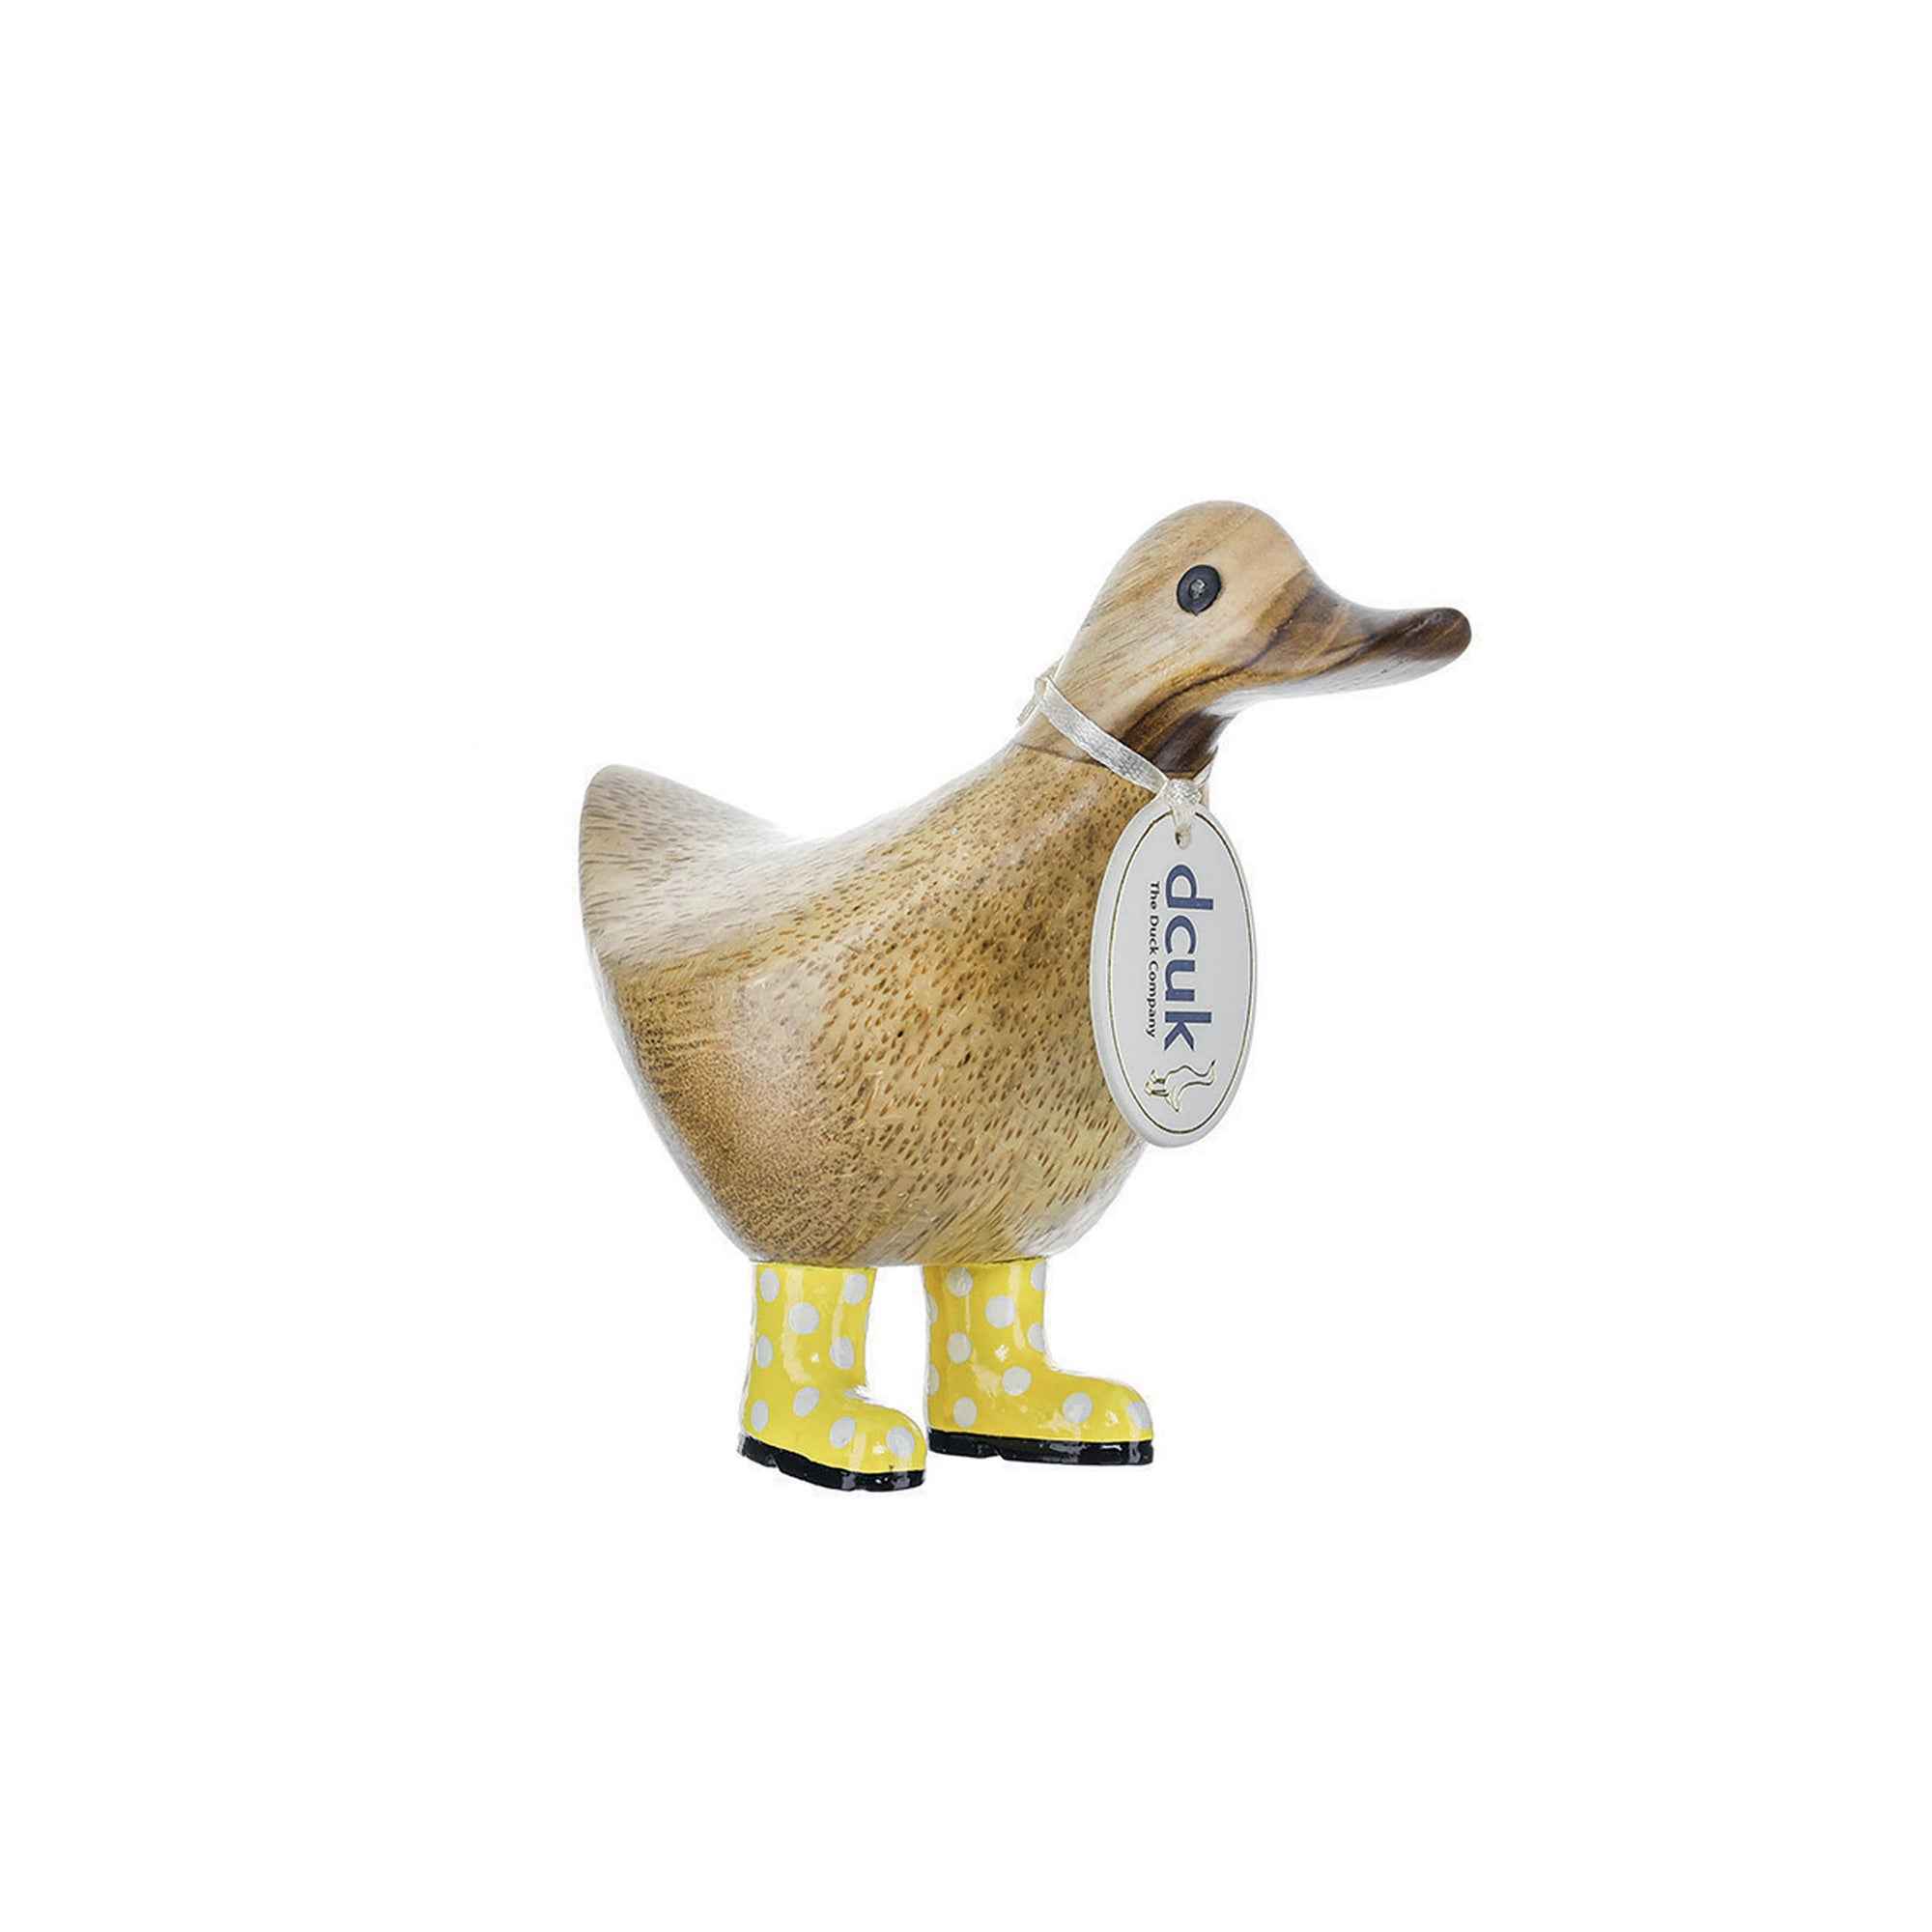 DCUK NATURAL WELLY DUCKY SPOTTY NATURAL